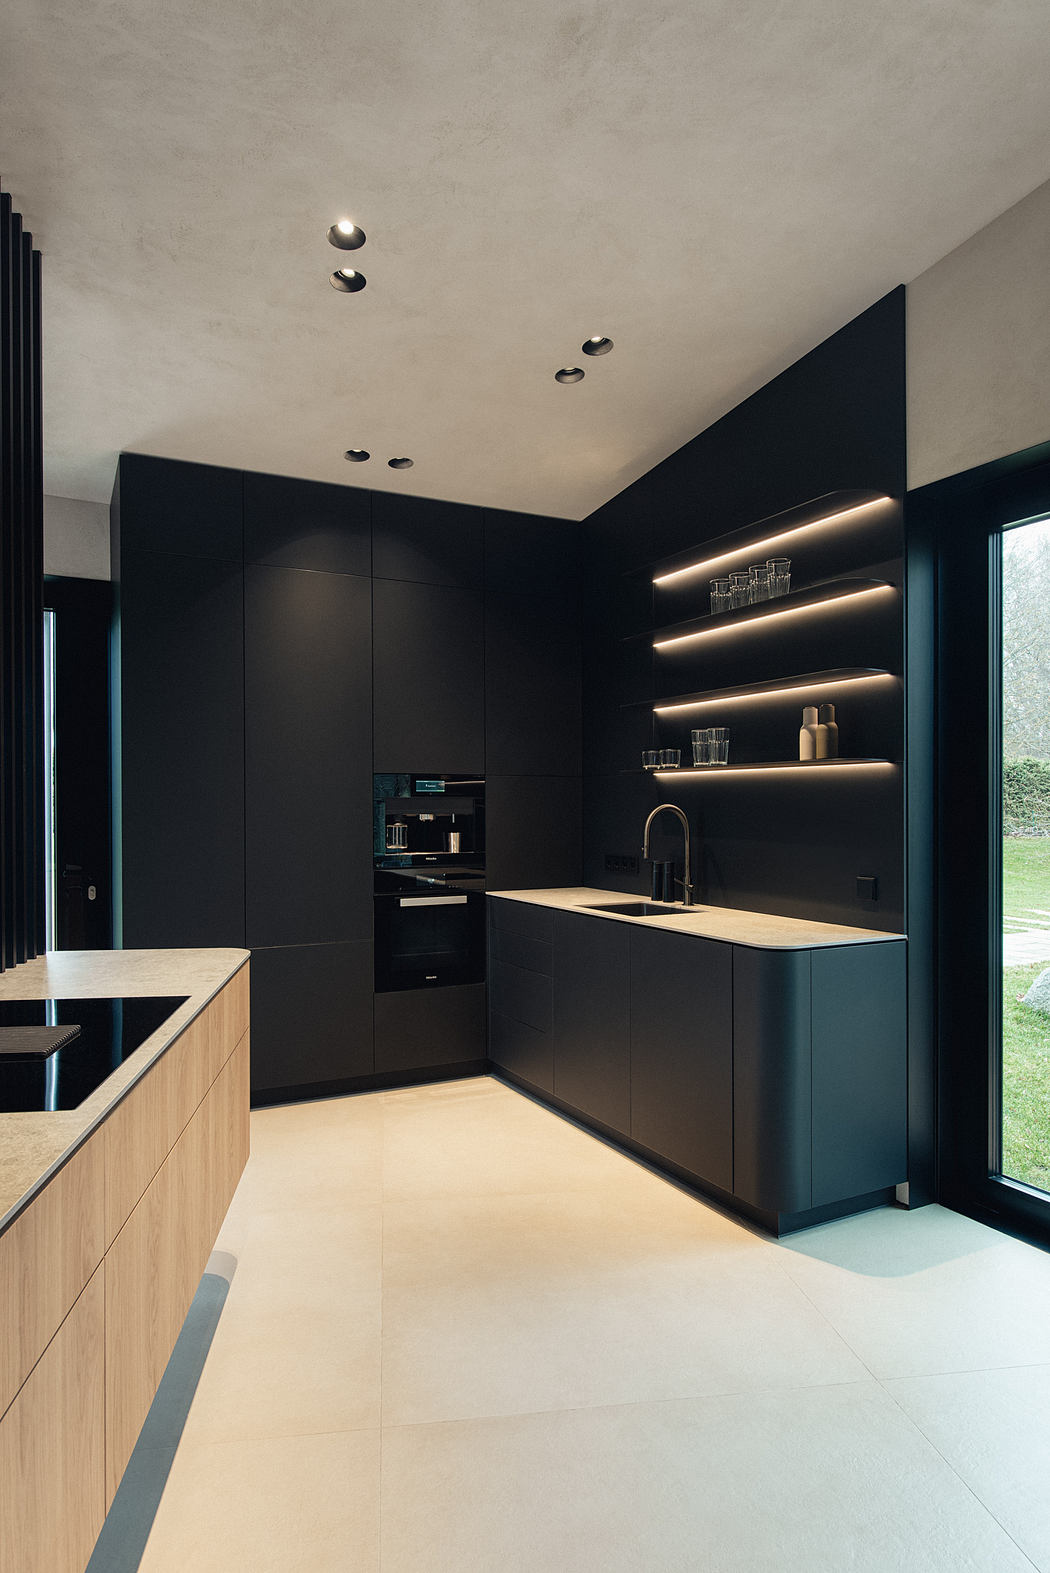 Sleek, modern kitchen design featuring black cabinetry, integrated lighting, and natural wood accents.